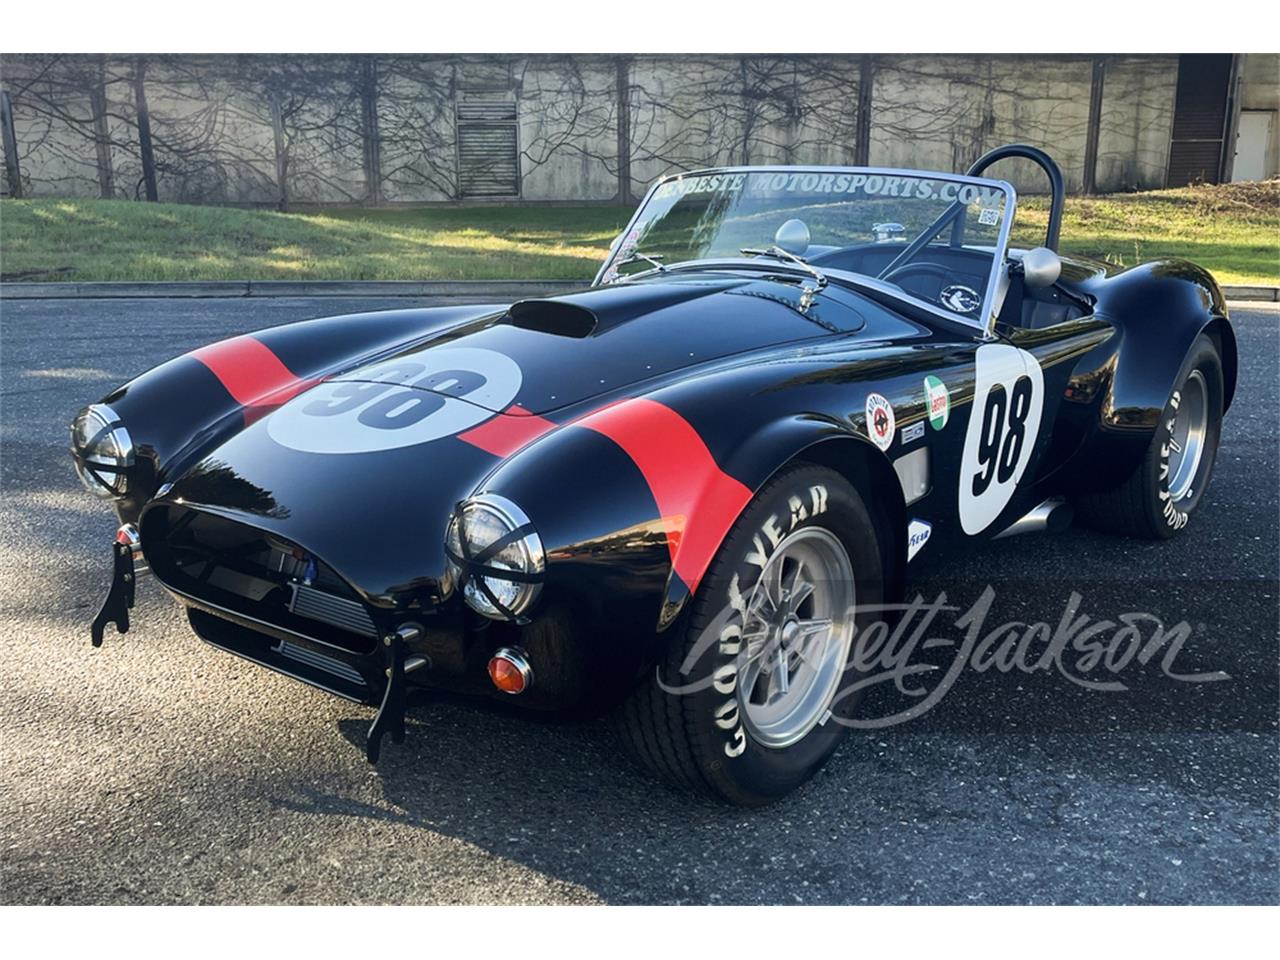 For Sale at Auction: 1965 Shelby Cobra in Scottsdale, Arizona for sale in Scottsdale, AZ